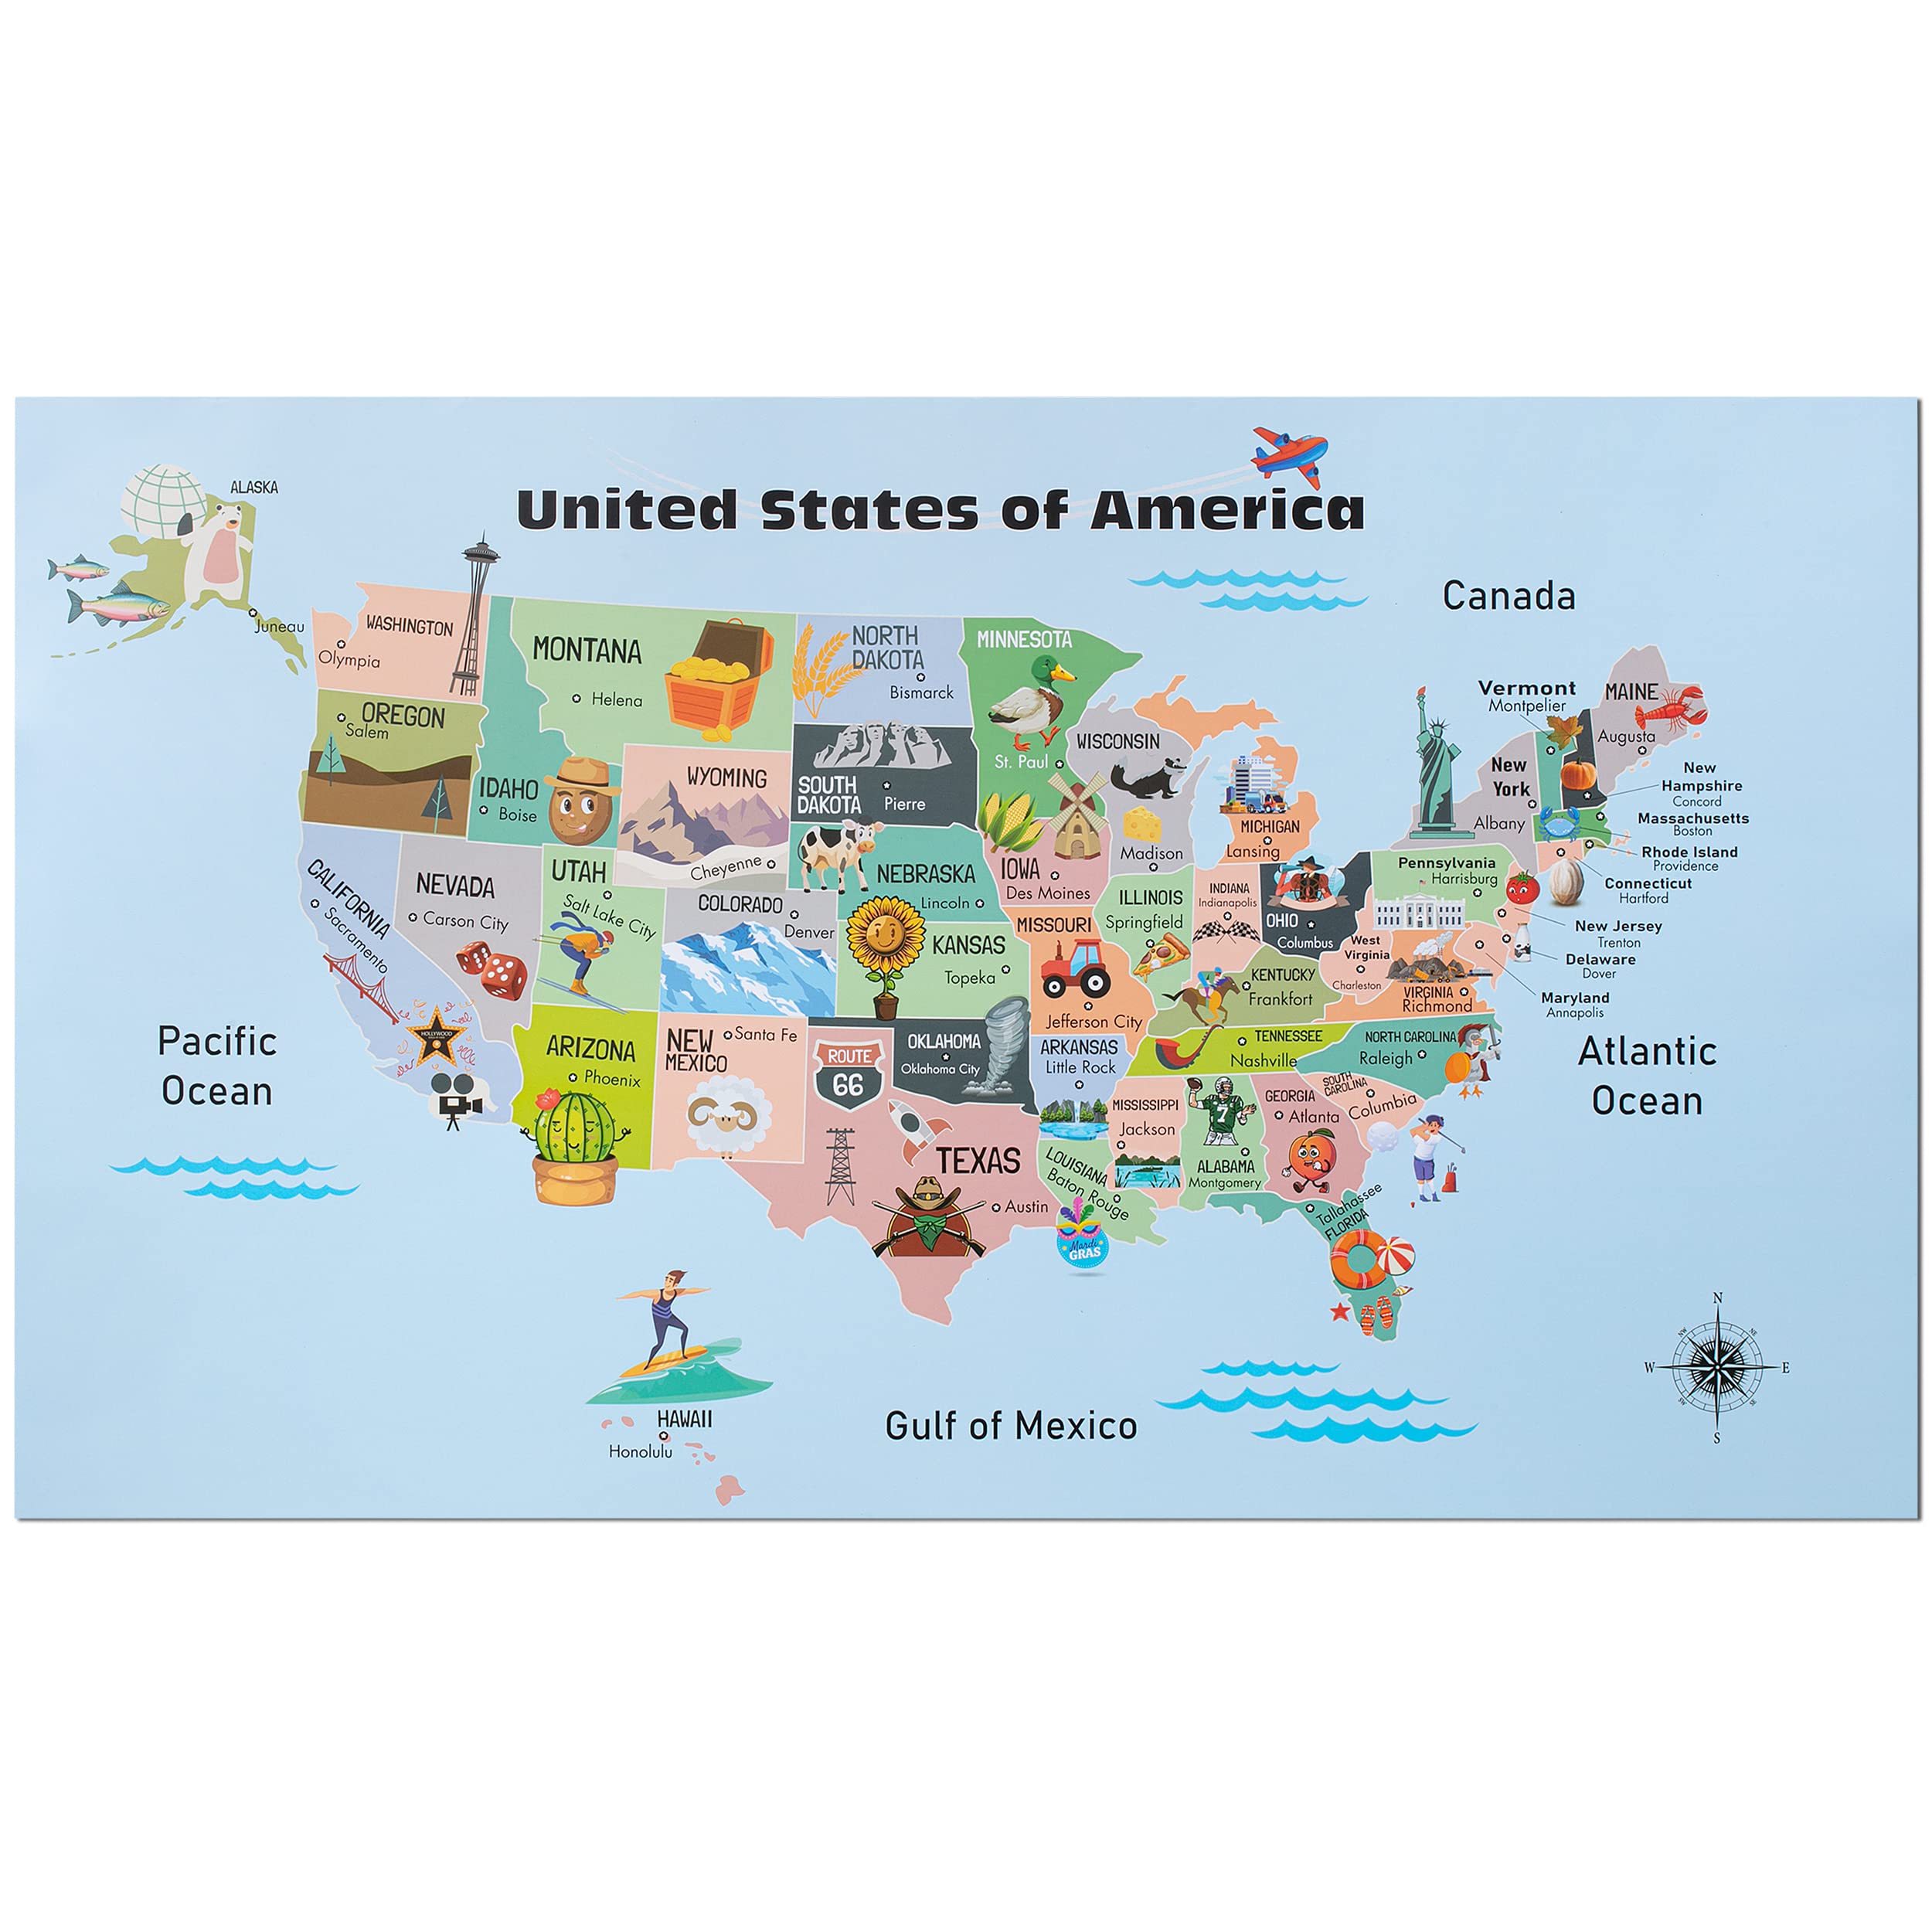 Mr. Pen- United States Map for Kids, 14.5”x 24.6”, Us Map for Kids Learning, Map of Usa, Wall Maps, Usa Map Poster - image 1 of 9